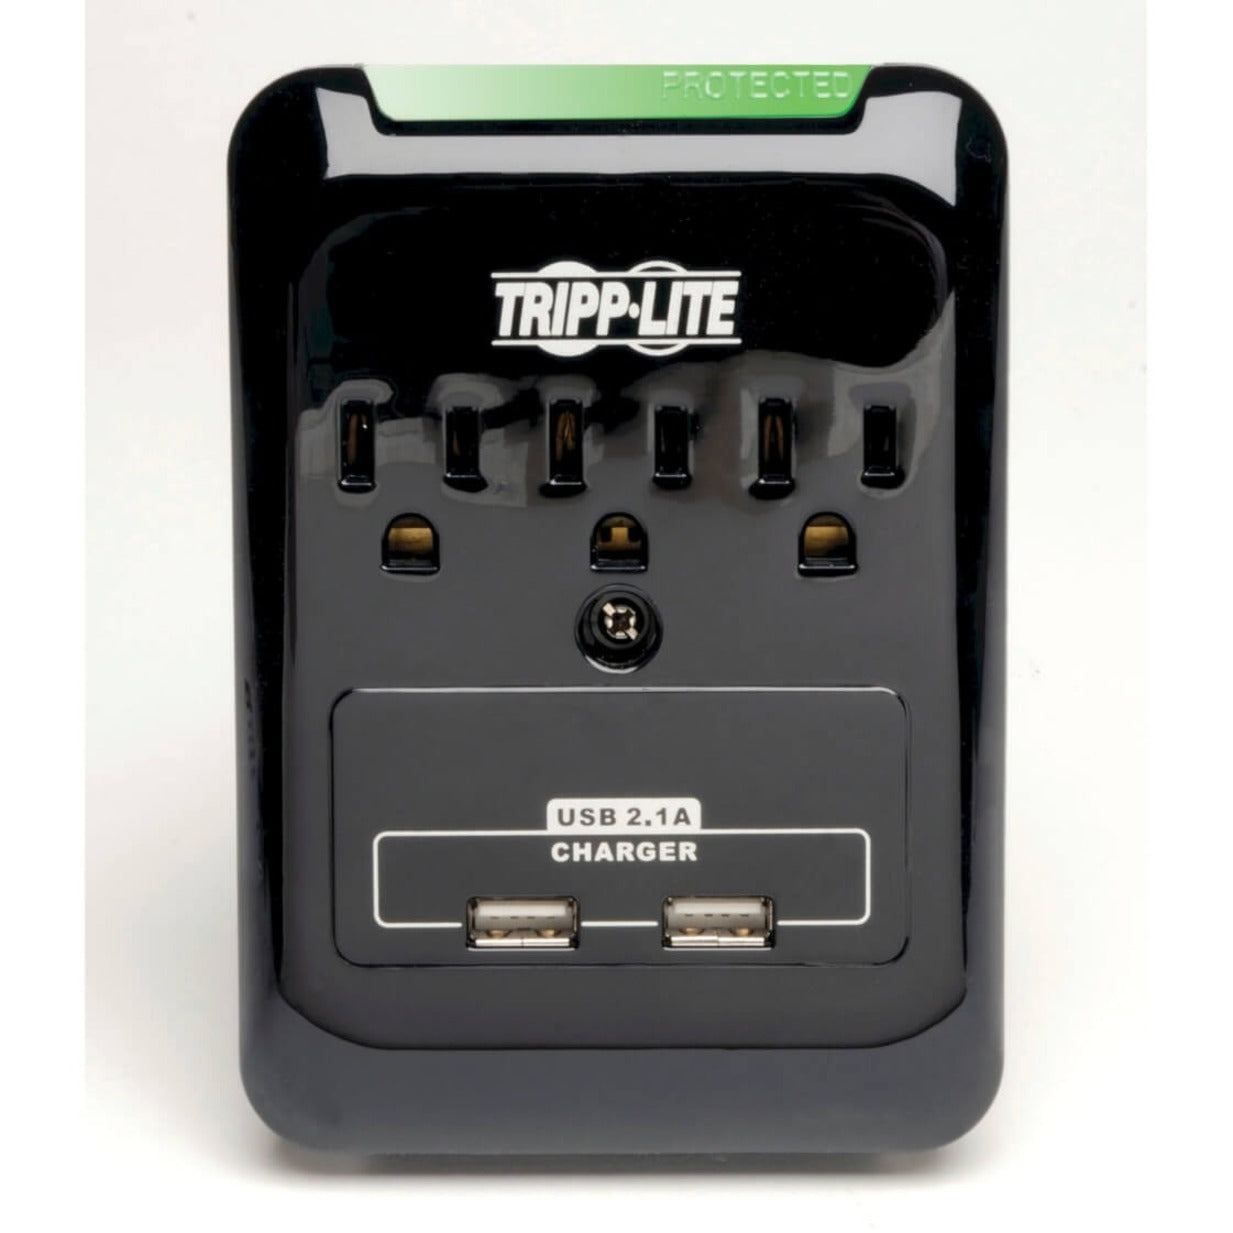 Tripp Lite Protect It! 3-Outlet Surge Protector Direct Plug-In 540 Joules 2.1 A USB Charger Diagnostic LED